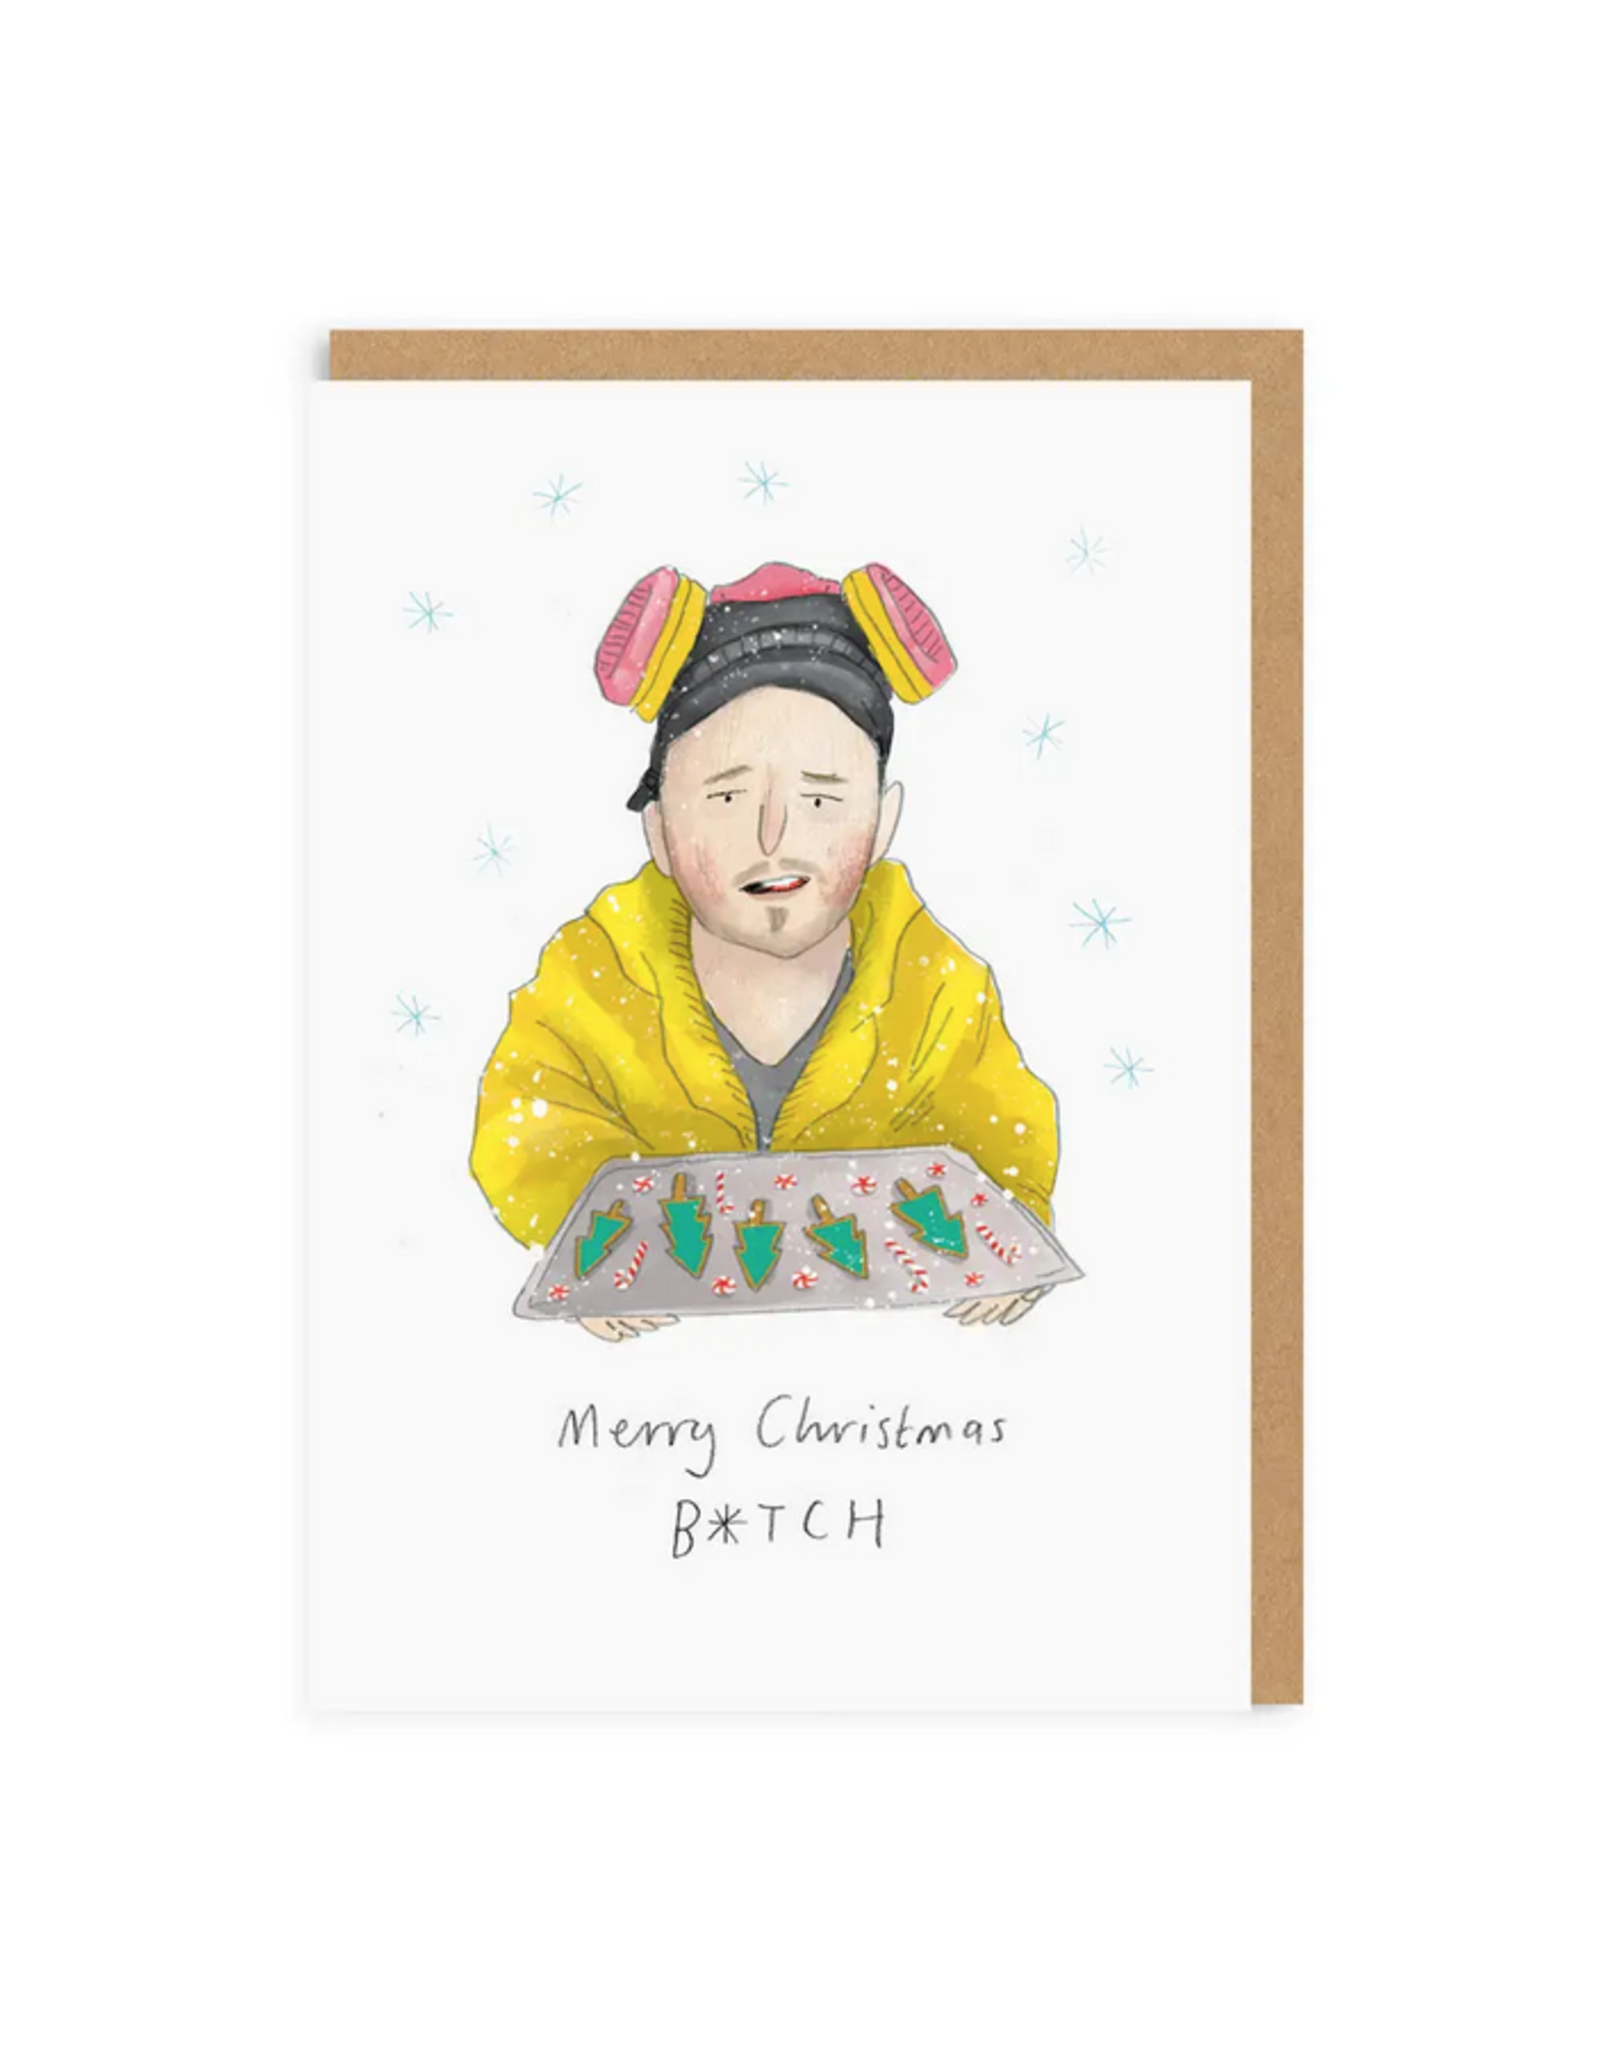 Merry Christmas B*tch Breaking Bad Greeting Card